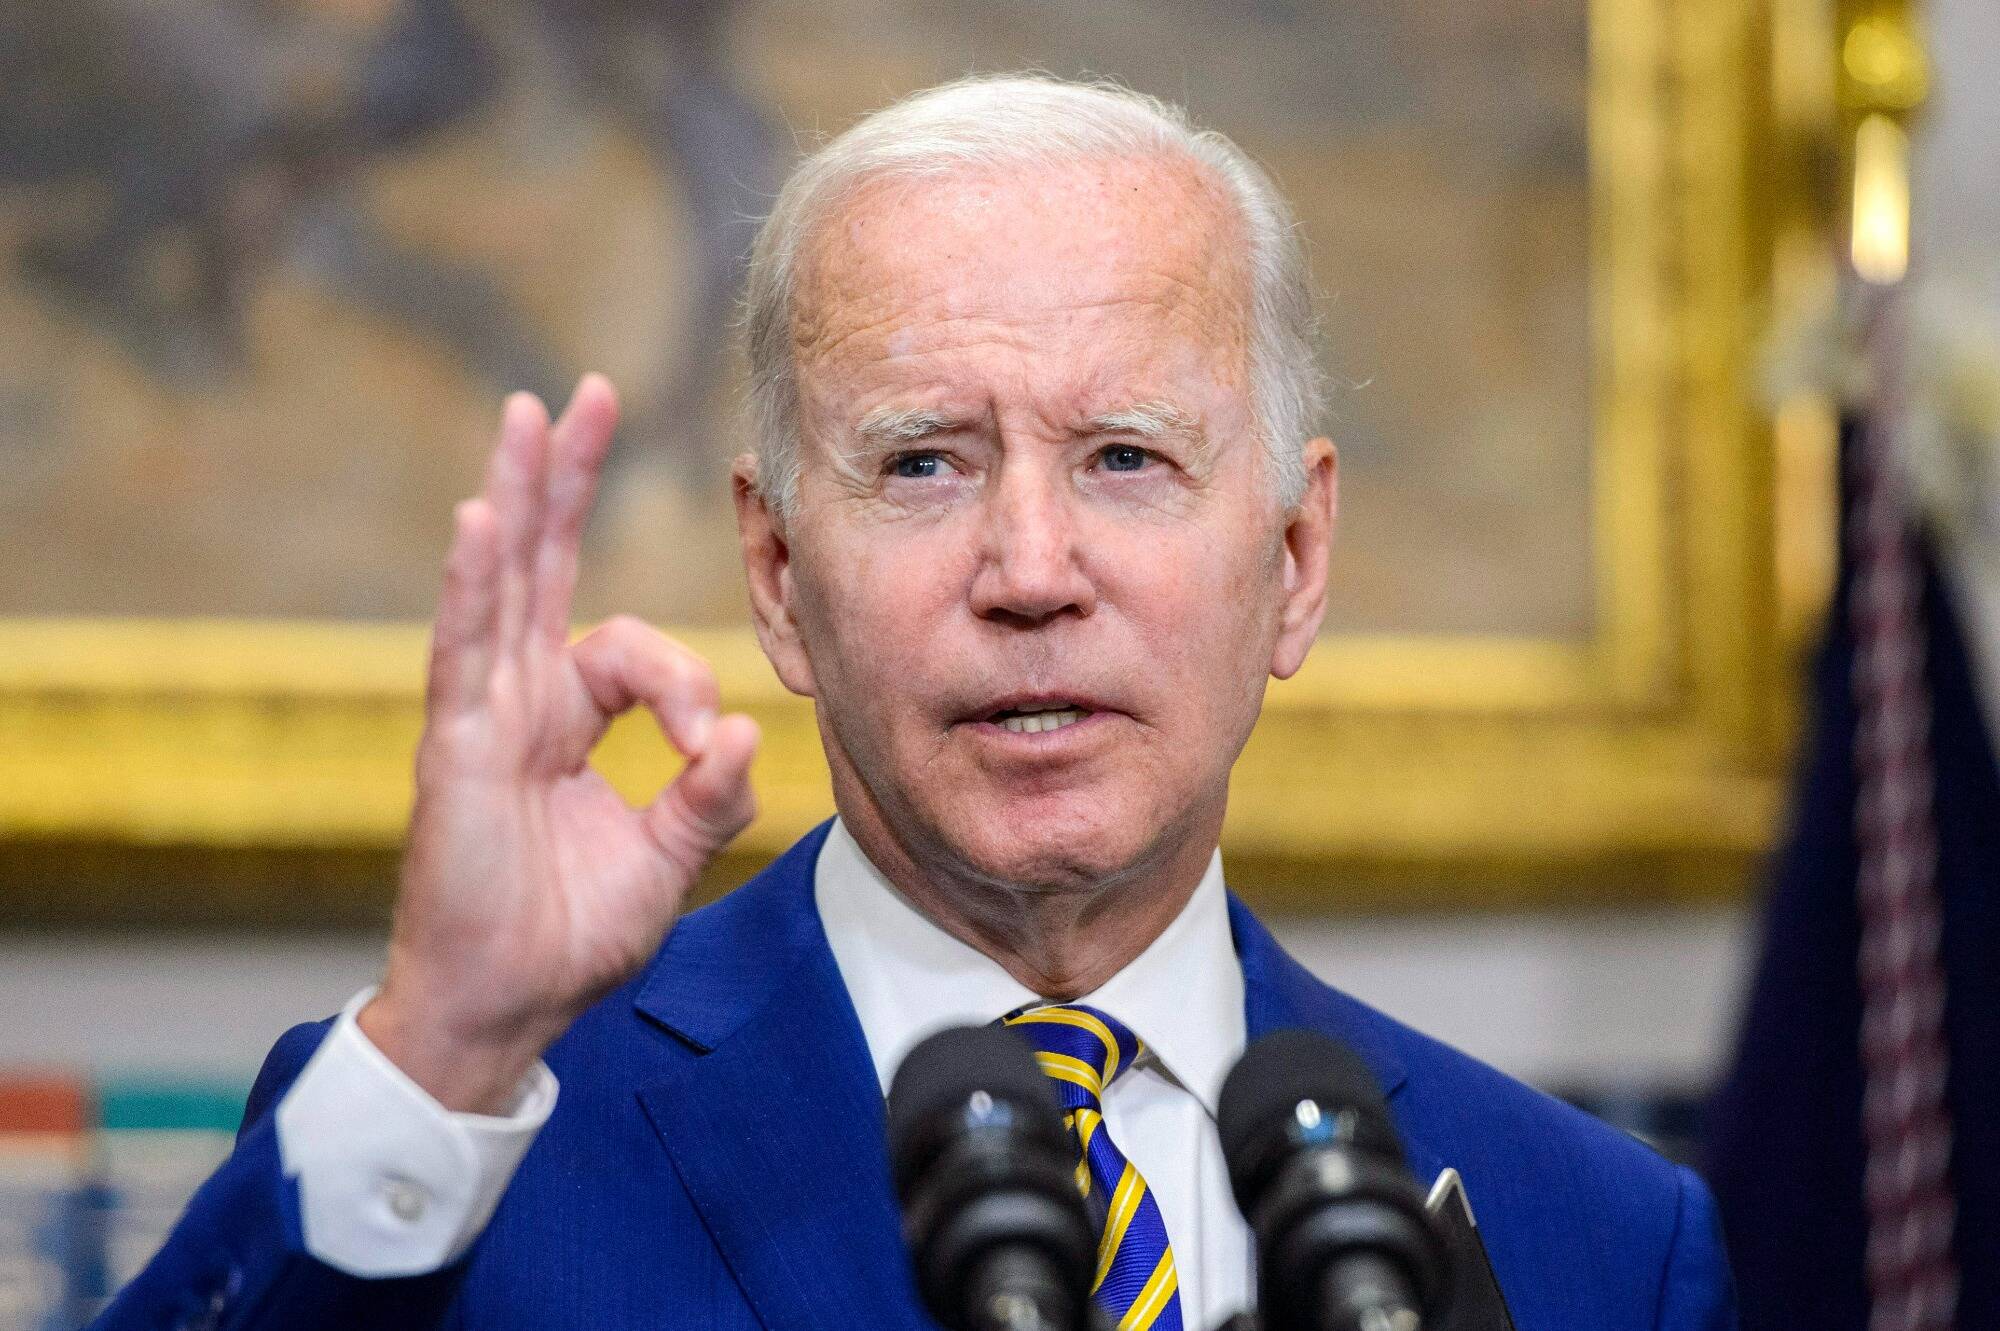 Special prosecutor appointed to investigate confidential Joe Biden documents